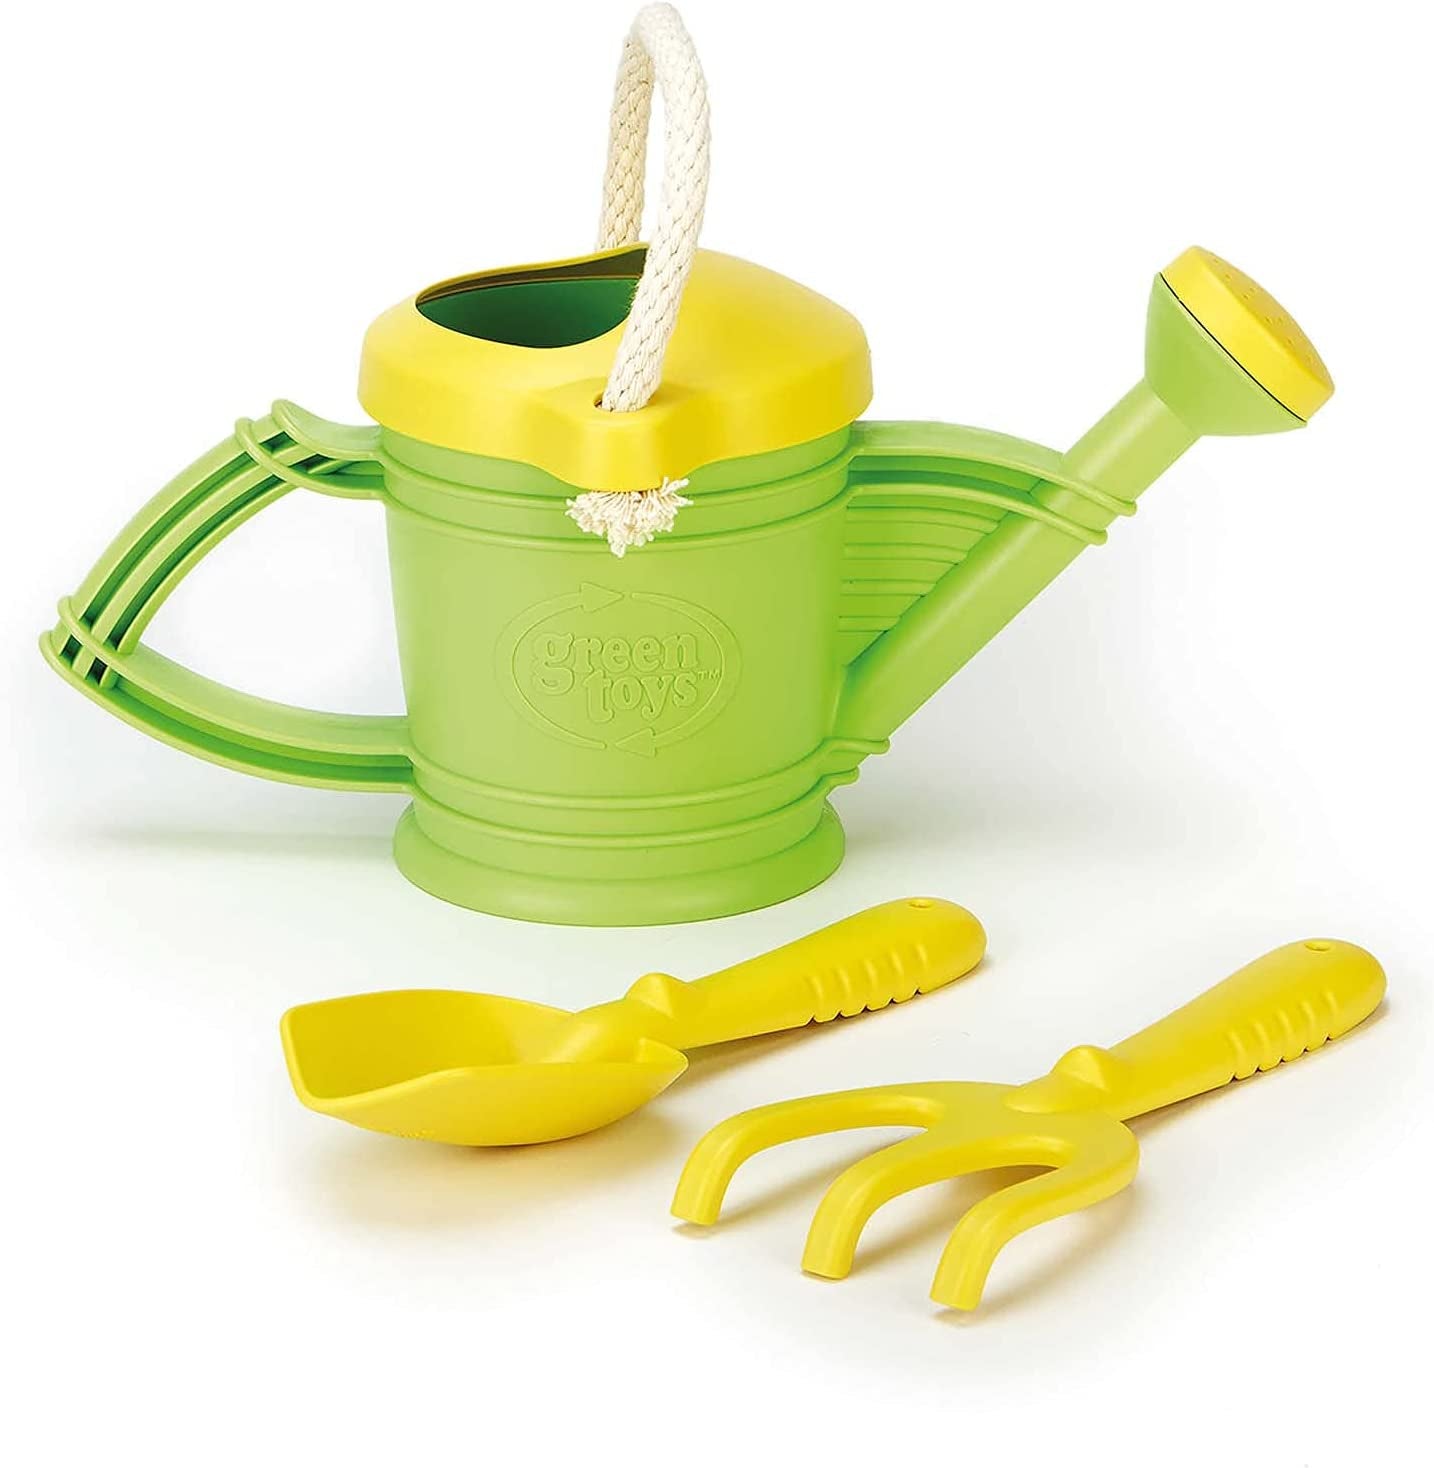 Watering Can Toy, Green